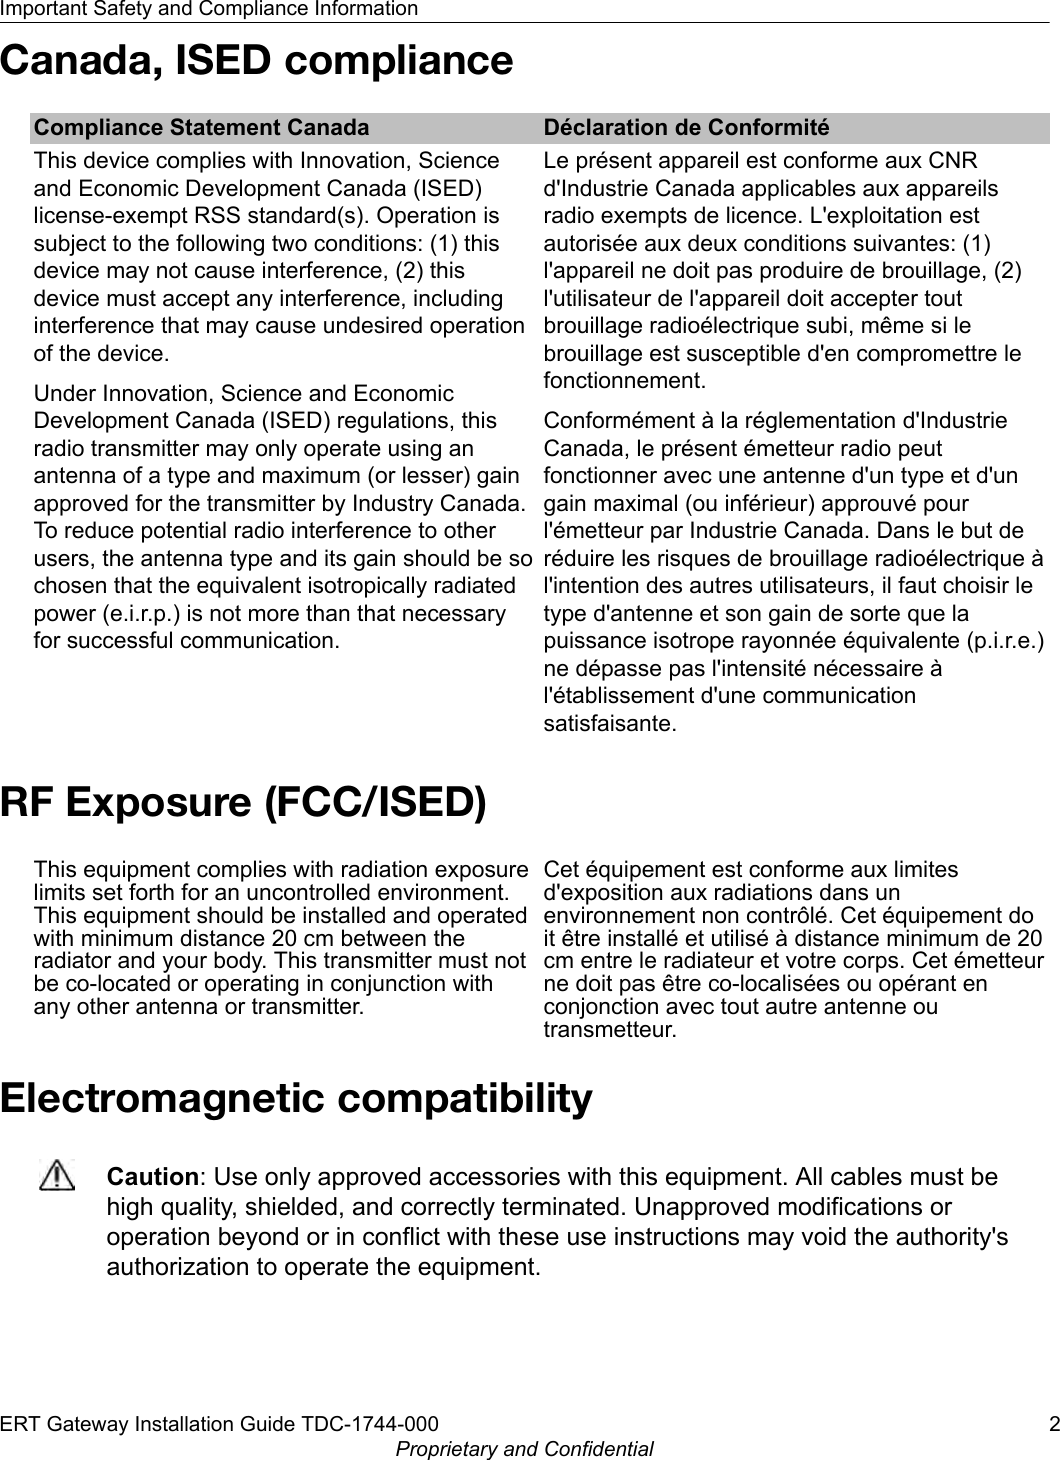 Canada, ISED complianceCompliance Statement Canada Déclaration de ConformitéThis device complies with Innovation, Scienceand Economic Development Canada (ISED)license-exempt RSS standard(s). Operation issubject to the following two conditions: (1) thisdevice may not cause interference, (2) thisdevice must accept any interference, includinginterference that may cause undesired operationof the device.Under Innovation, Science and EconomicDevelopment Canada (ISED) regulations, thisradio transmitter may only operate using anantenna of a type and maximum (or lesser) gainapproved for the transmitter by Industry Canada.To reduce potential radio interference to otherusers, the antenna type and its gain should be sochosen that the equivalent isotropically radiatedpower (e.i.r.p.) is not more than that necessaryfor successful communication.Le présent appareil est conforme aux CNRd&apos;Industrie Canada applicables aux appareilsradio exempts de licence. L&apos;exploitation estautorisée aux deux conditions suivantes: (1)l&apos;appareil ne doit pas produire de brouillage, (2)l&apos;utilisateur de l&apos;appareil doit accepter toutbrouillage radioélectrique subi, même si lebrouillage est susceptible d&apos;en compromettre lefonctionnement.Conformément à la réglementation d&apos;IndustrieCanada, le présent émetteur radio peutfonctionner avec une antenne d&apos;un type et d&apos;ungain maximal (ou inférieur) approuvé pourl&apos;émetteur par Industrie Canada. Dans le but deréduire les risques de brouillage radioélectrique àl&apos;intention des autres utilisateurs, il faut choisir letype d&apos;antenne et son gain de sorte que lapuissance isotrope rayonnée équivalente (p.i.r.e.)ne dépasse pas l&apos;intensité nécessaire àl&apos;établissement d&apos;une communicationsatisfaisante.RF Exposure (FCC/ISED)This equipment complies with radiation exposurelimits set forth for an uncontrolled environment.This equipment should be installed and operatedwith minimum distance 20 cm between theradiator and your body. This transmitter must notbe co-located or operating in conjunction withany other antenna or transmitter.Cet équipement est conforme aux limitesd&apos;exposition aux radiations dans unenvironnement non contrôlé. Cet équipement doit être installé et utilisé à distance minimum de 20cm entre le radiateur et votre corps. Cet émetteurne doit pas être co-localisées ou opérant enconjonction avec tout autre antenne outransmetteur.Electromagnetic compatibilityCaution: Use only approved accessories with this equipment. All cables must behigh quality, shielded, and correctly terminated. Unapproved modifications oroperation beyond or in conflict with these use instructions may void the authority&apos;sauthorization to operate the equipment.Important Safety and Compliance InformationERT Gateway Installation Guide TDC-1744-000 2Proprietary and Confidential